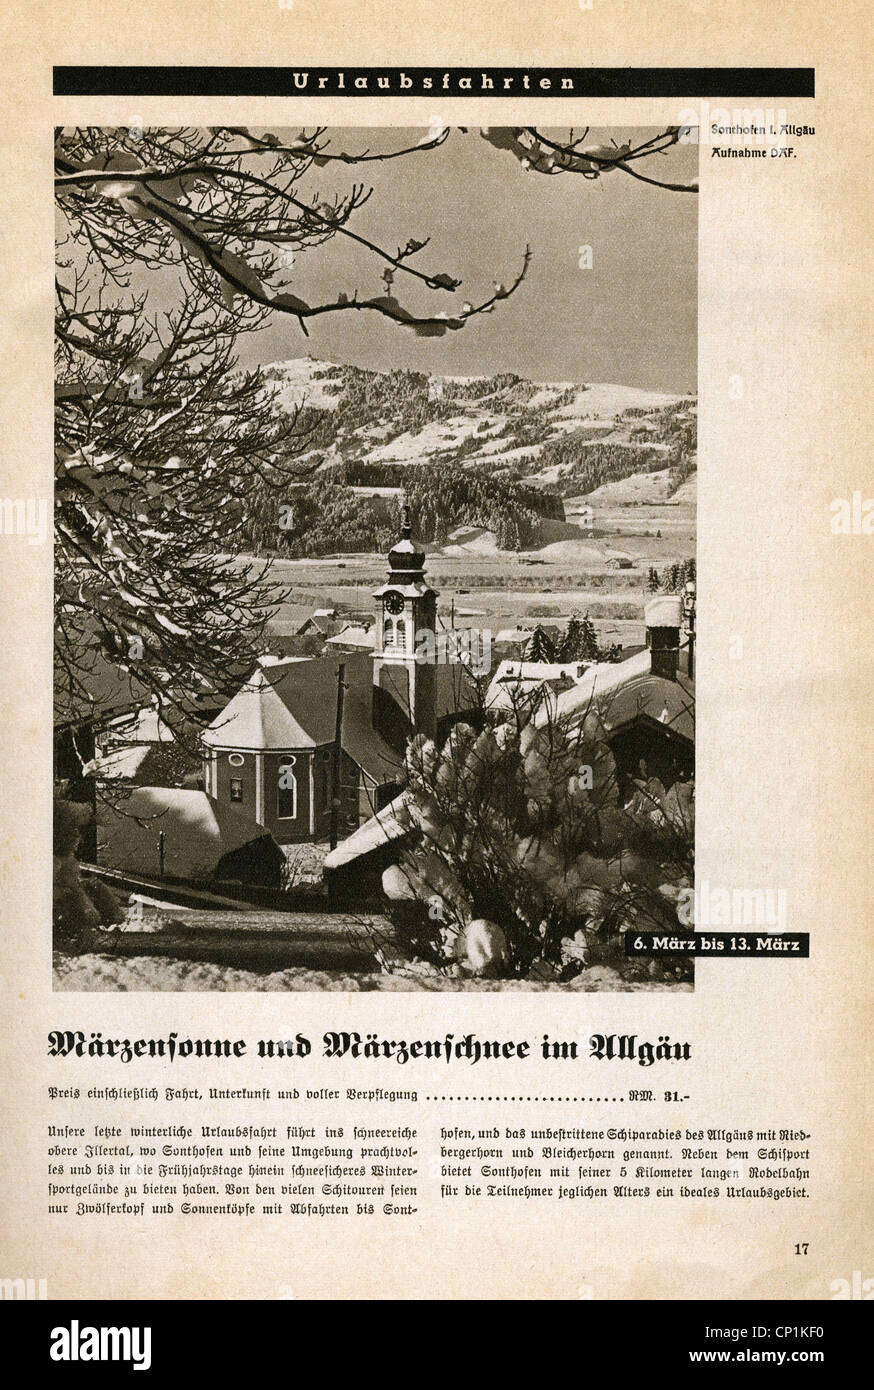 Nazism / National Socialism, organisations, 'Kraft durch Freude' ('Strength through Joy', KdF), journeys, advert, hollidays in the Allgaeu, Swabia, magazine of Gau Munich Upper Bavaria, March 1938, Additional-Rights-Clearences-Not Available Stock Photo